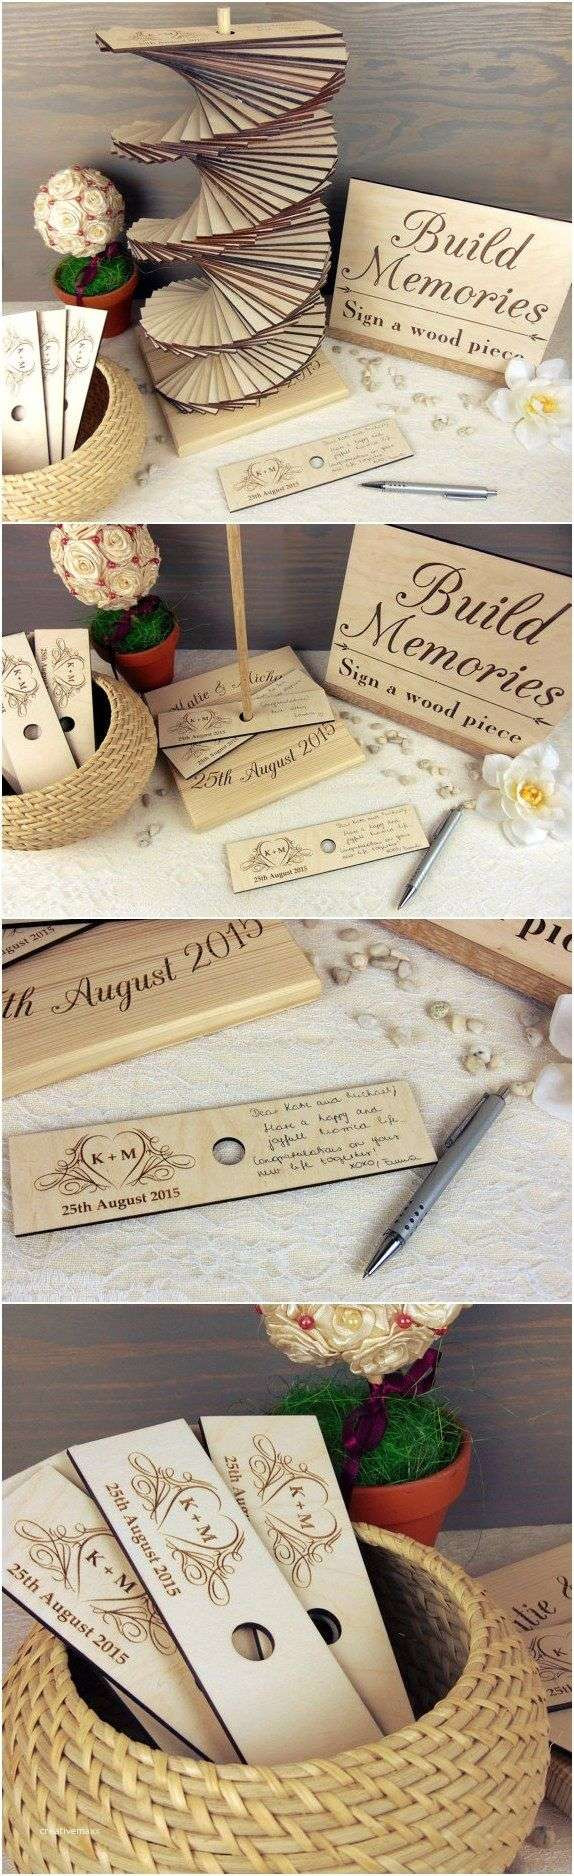 Country Wedding Guest Book Ideas
 Inspirational Country Wedding Guest Book Ideas Creative